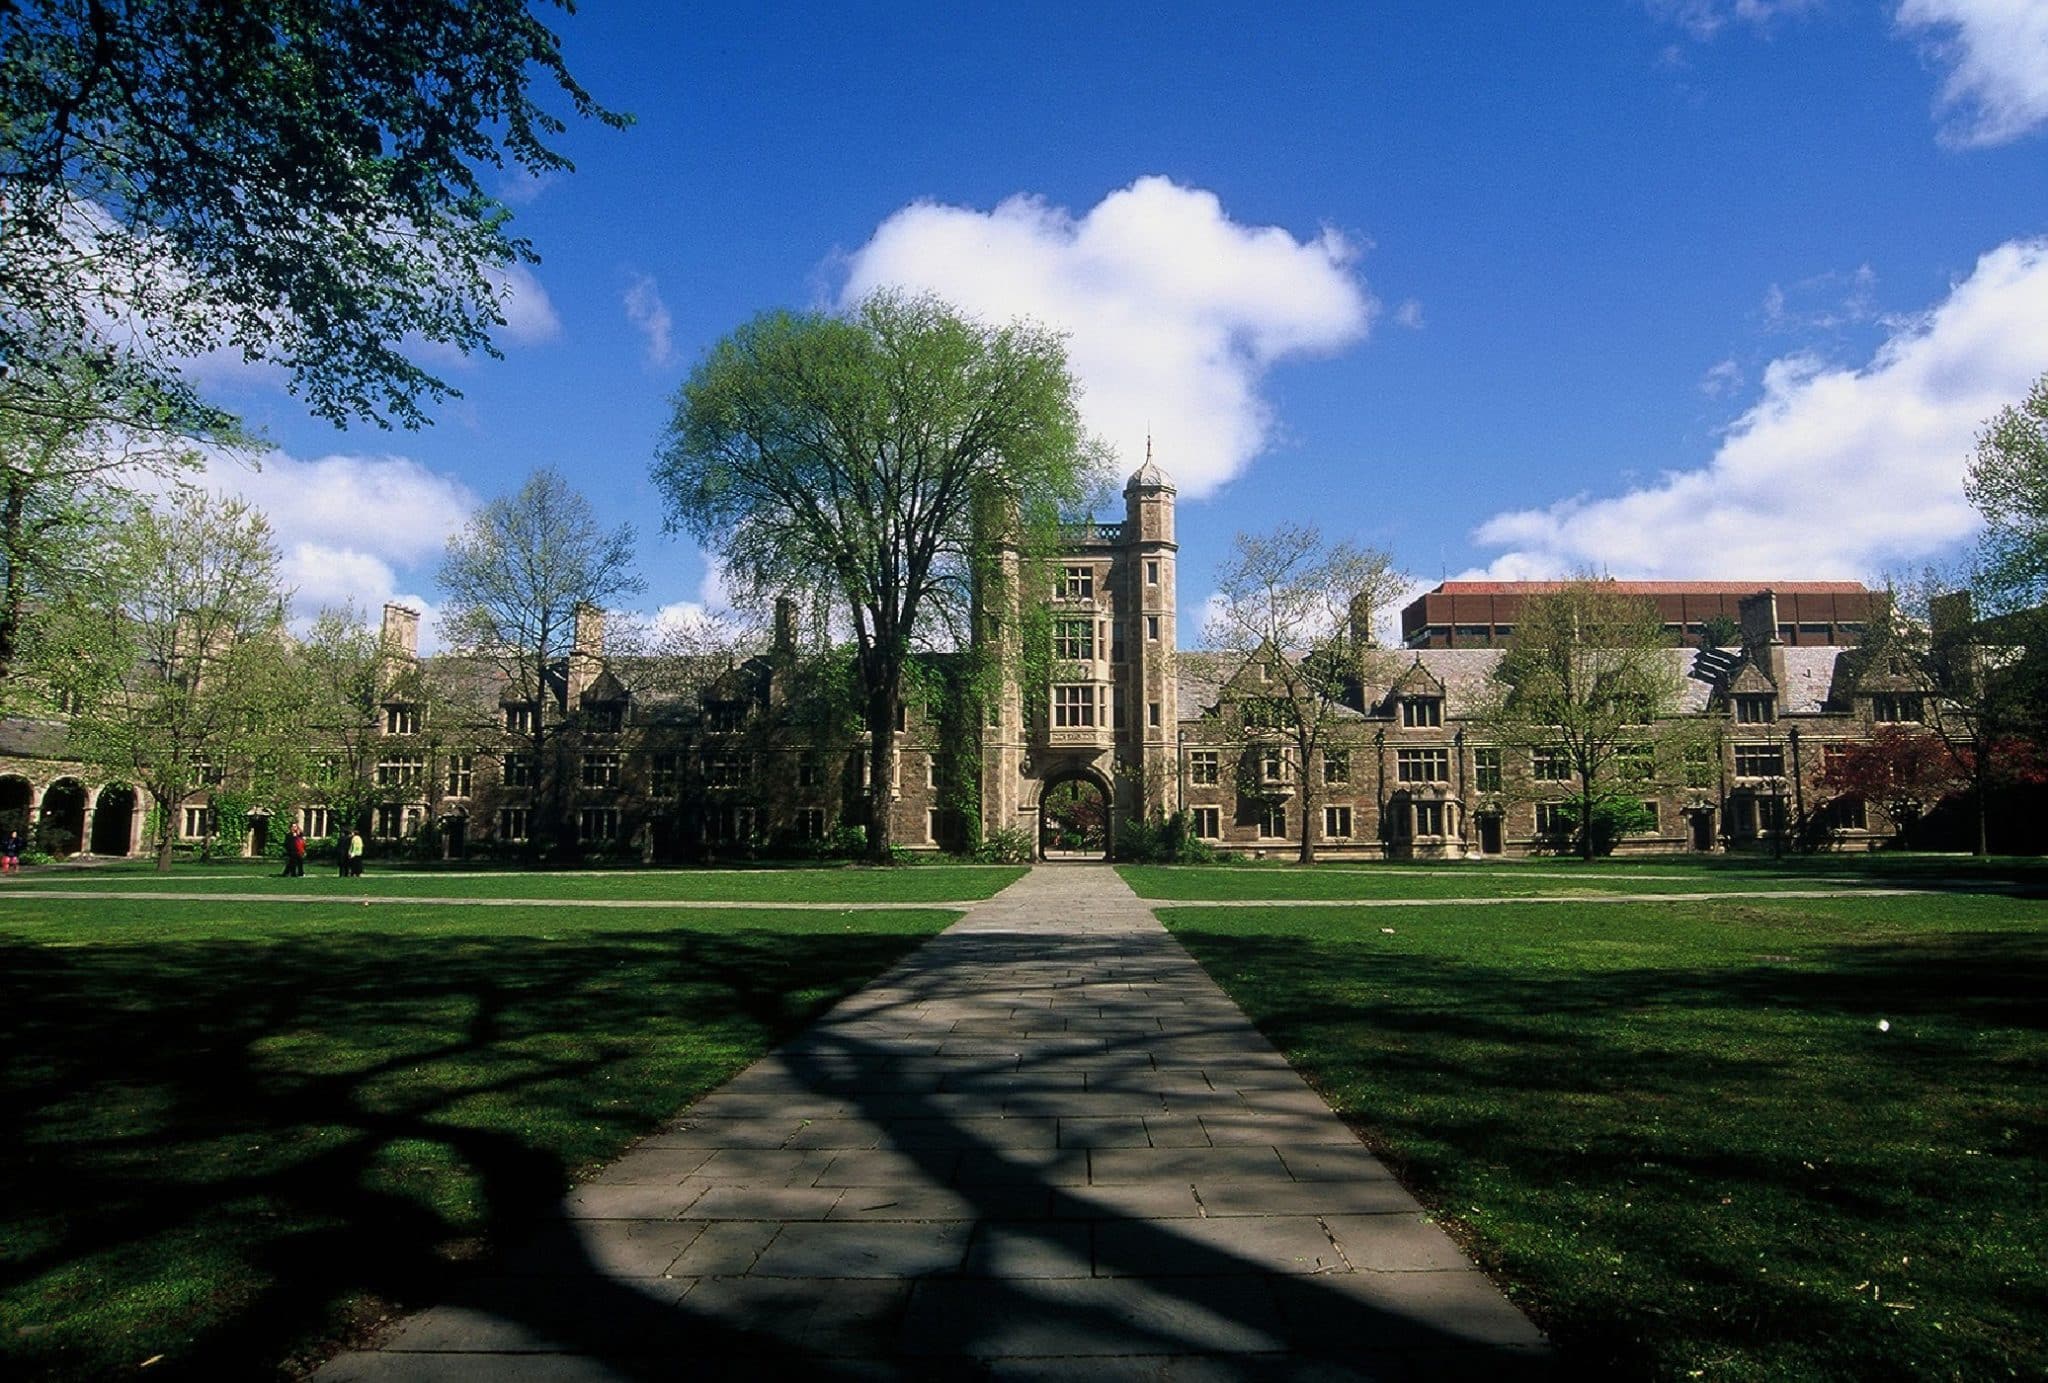 The University of Michigan is pictured in Ann Arbor, Michigan.